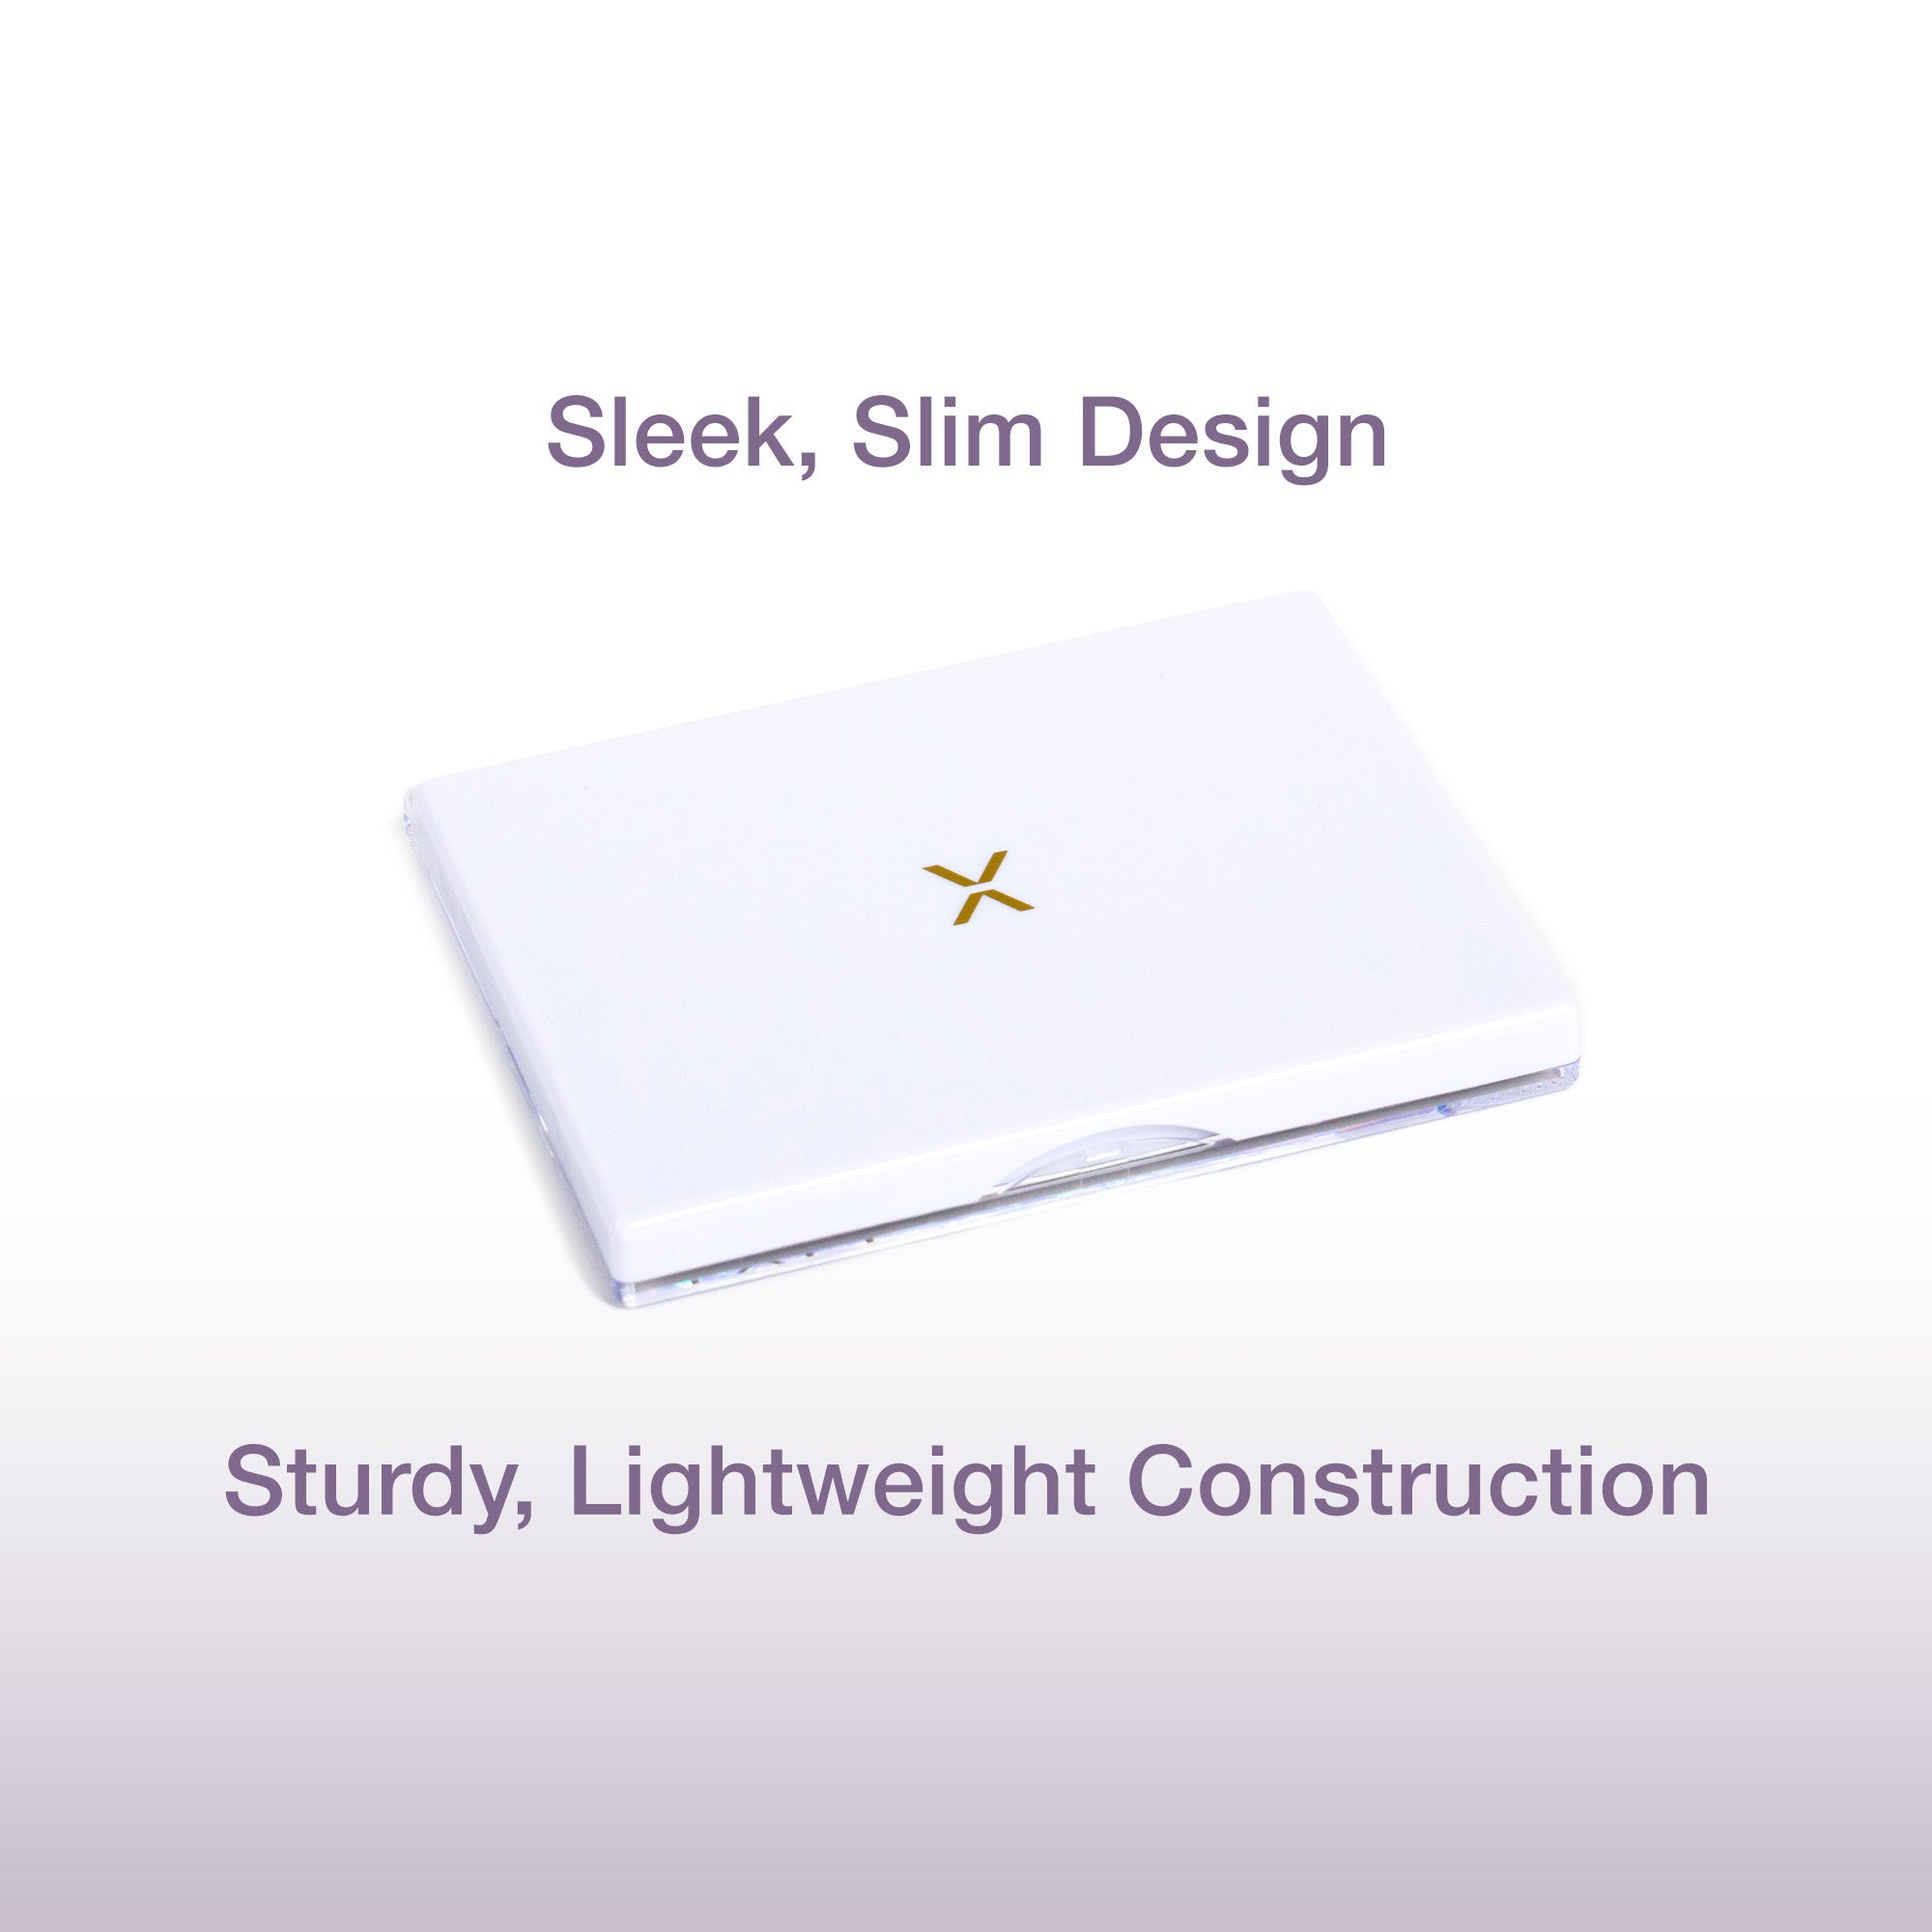 The FIXY small empty makeup palette presented with a sleek, slim design and sturdy, lightweight construction, featuring a simple white exterior with a subtle gold logo, embodying elegance and practicality for makeup storage and transport.